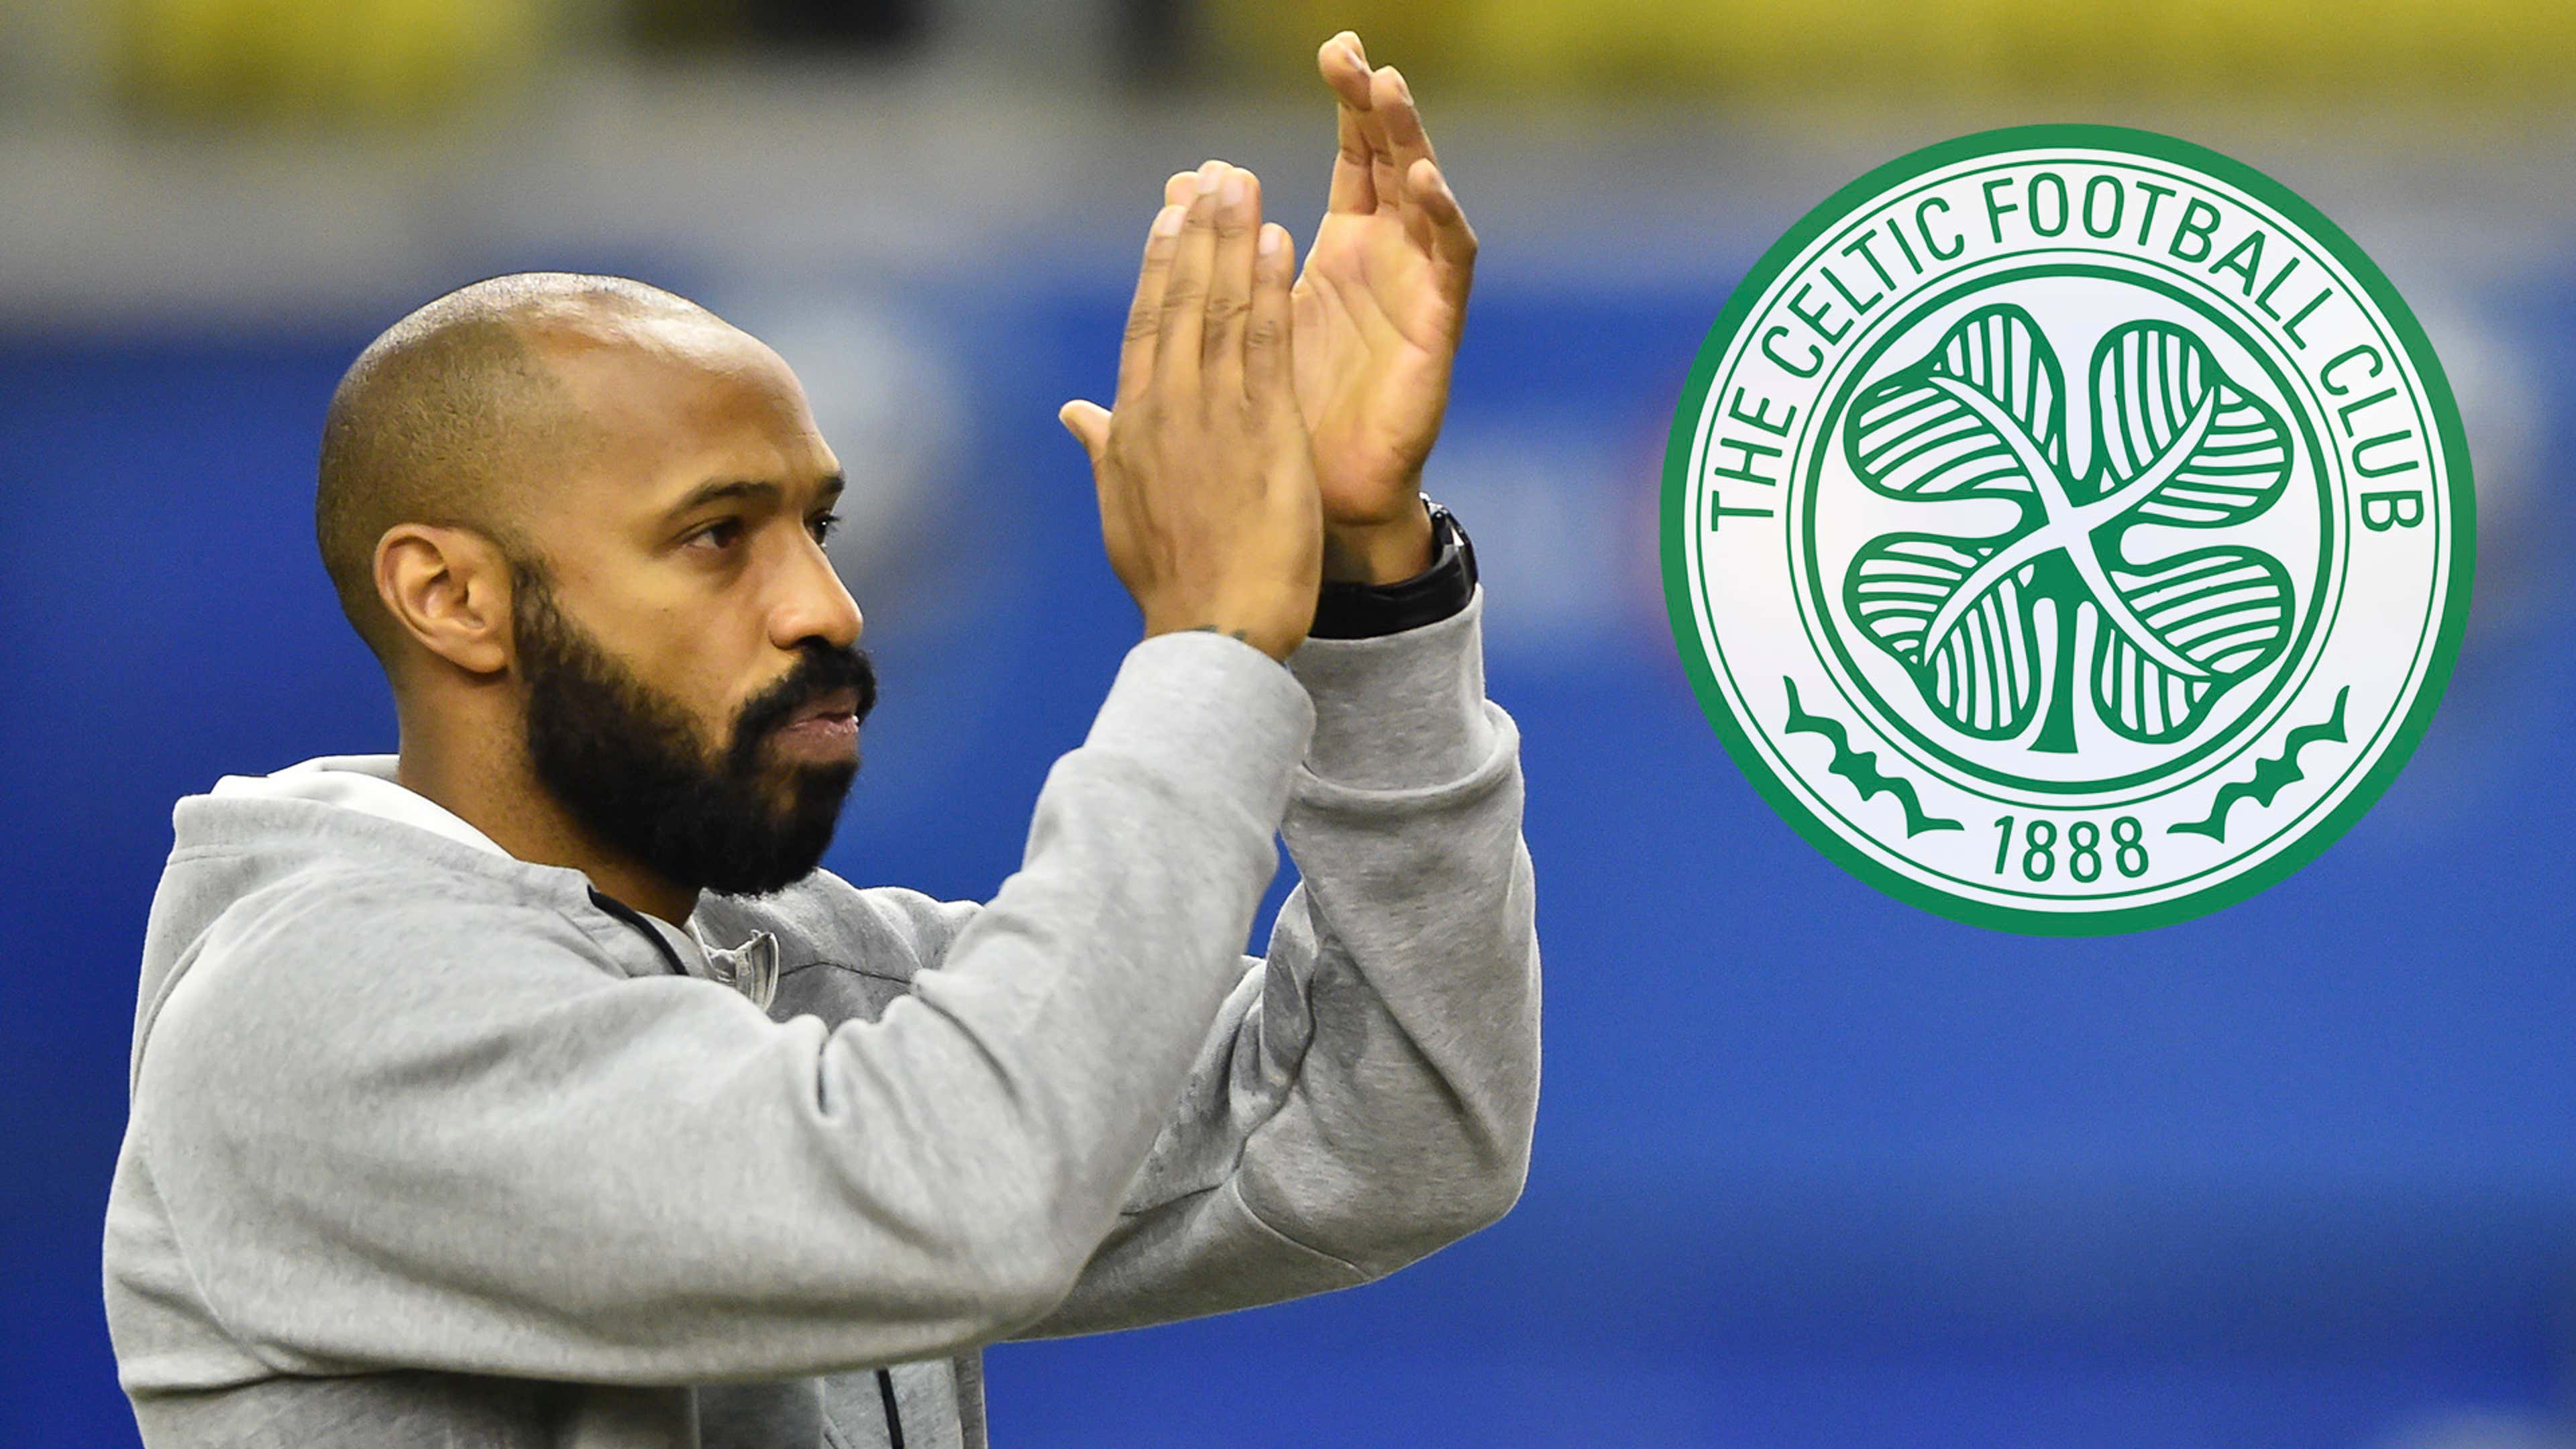 Thierry Henry Celtic 2020-21